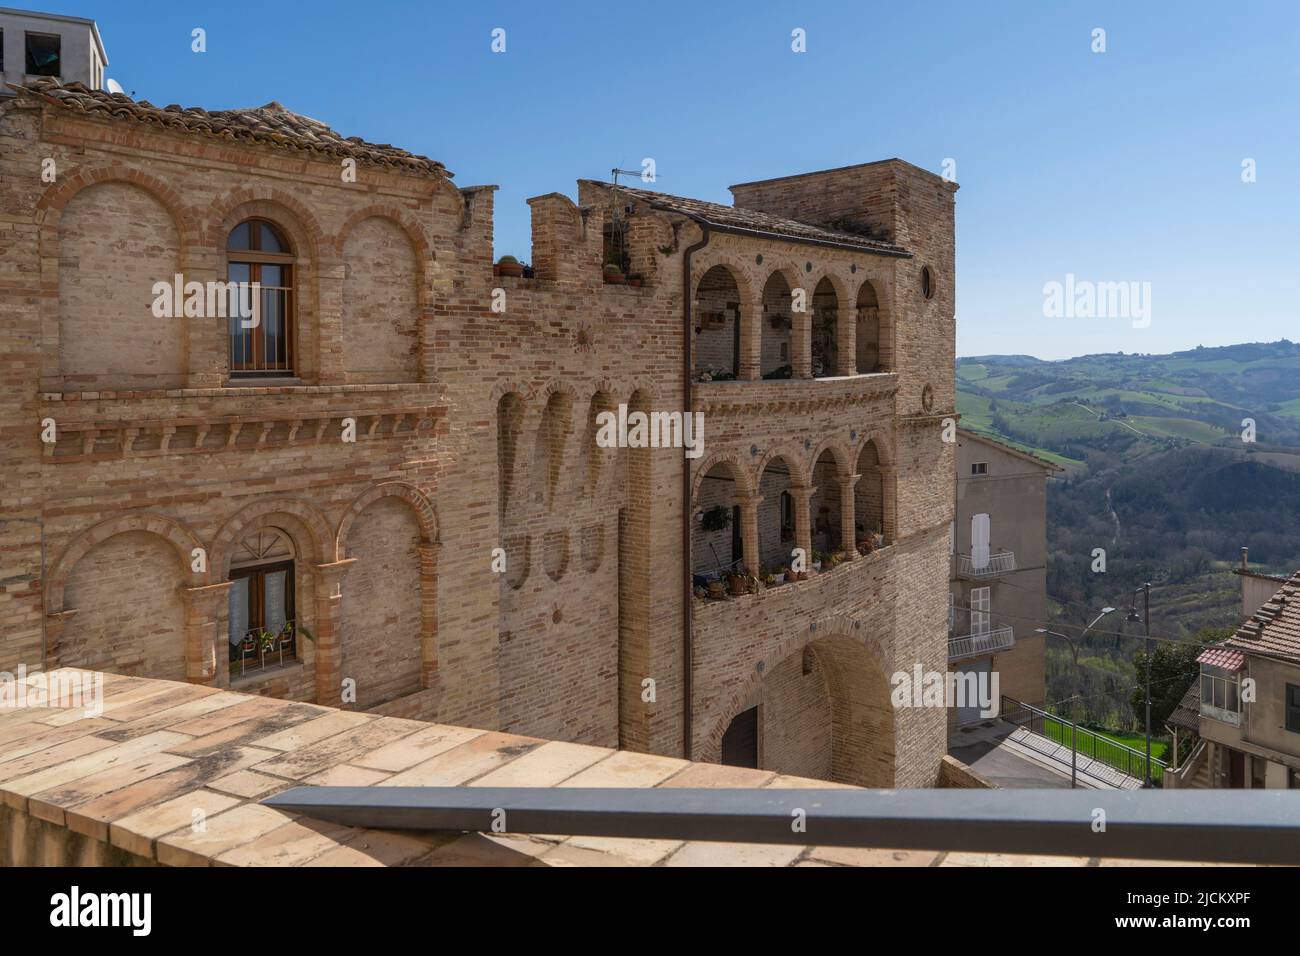 View of Medieval Castle, Massa Fermana, Marche, Italy, Europe Stock Photo